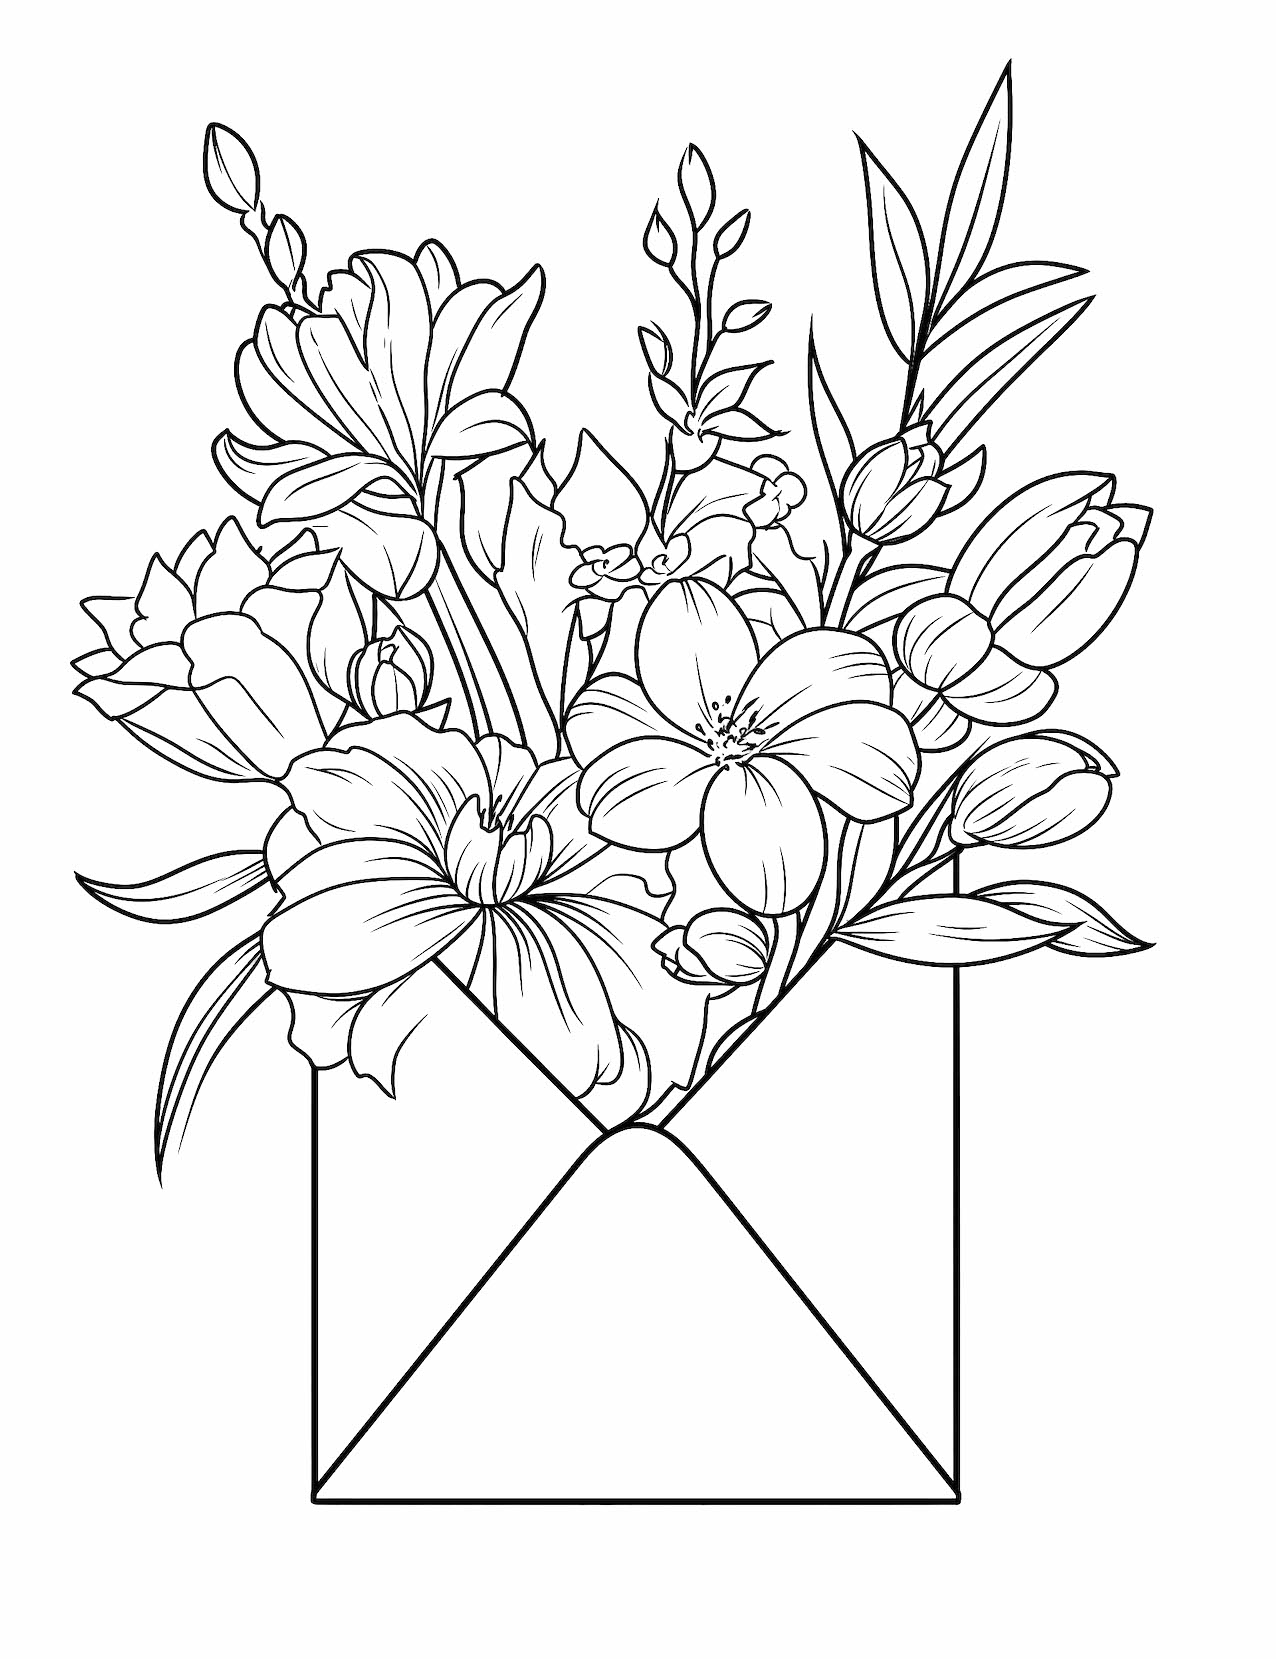 Fascinating printable spring coloring pages